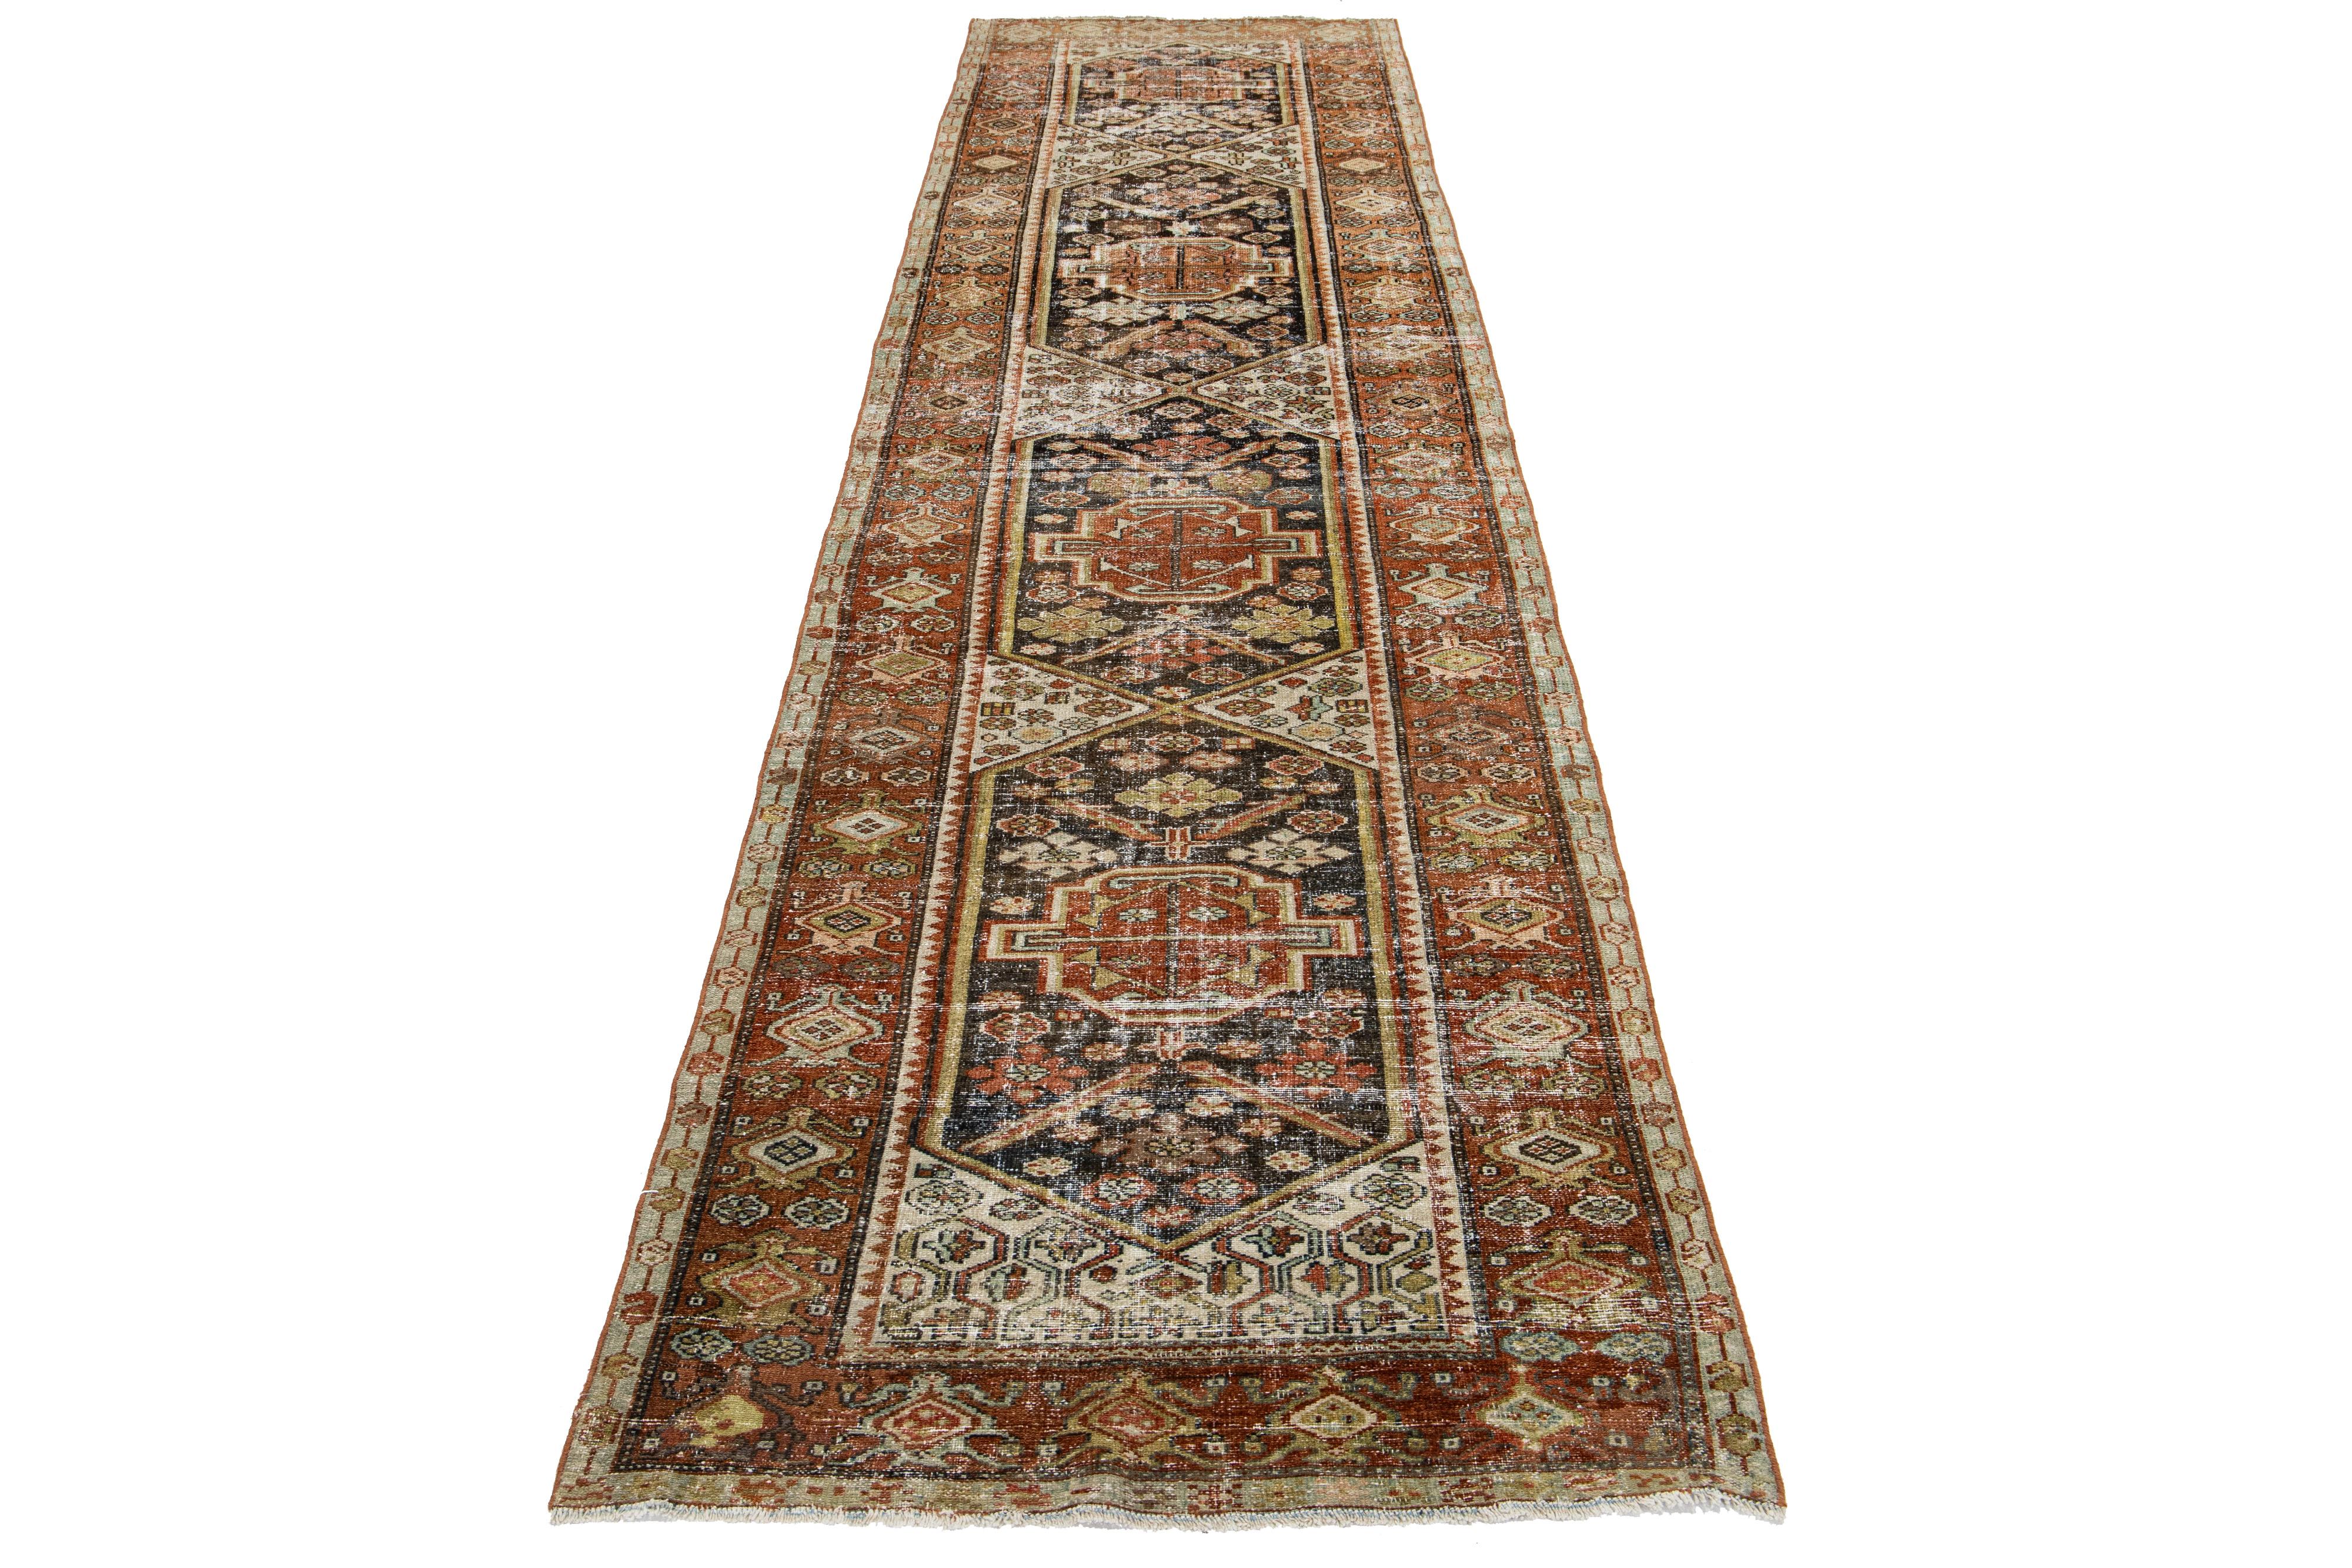 This Persian Malayer wool rug possesses an antique allure. It showcases hand-knotted wool in a brown color field. The tribal pattern is embellished with rust, blue, and goldenrod accents.

This rug measures 3'4